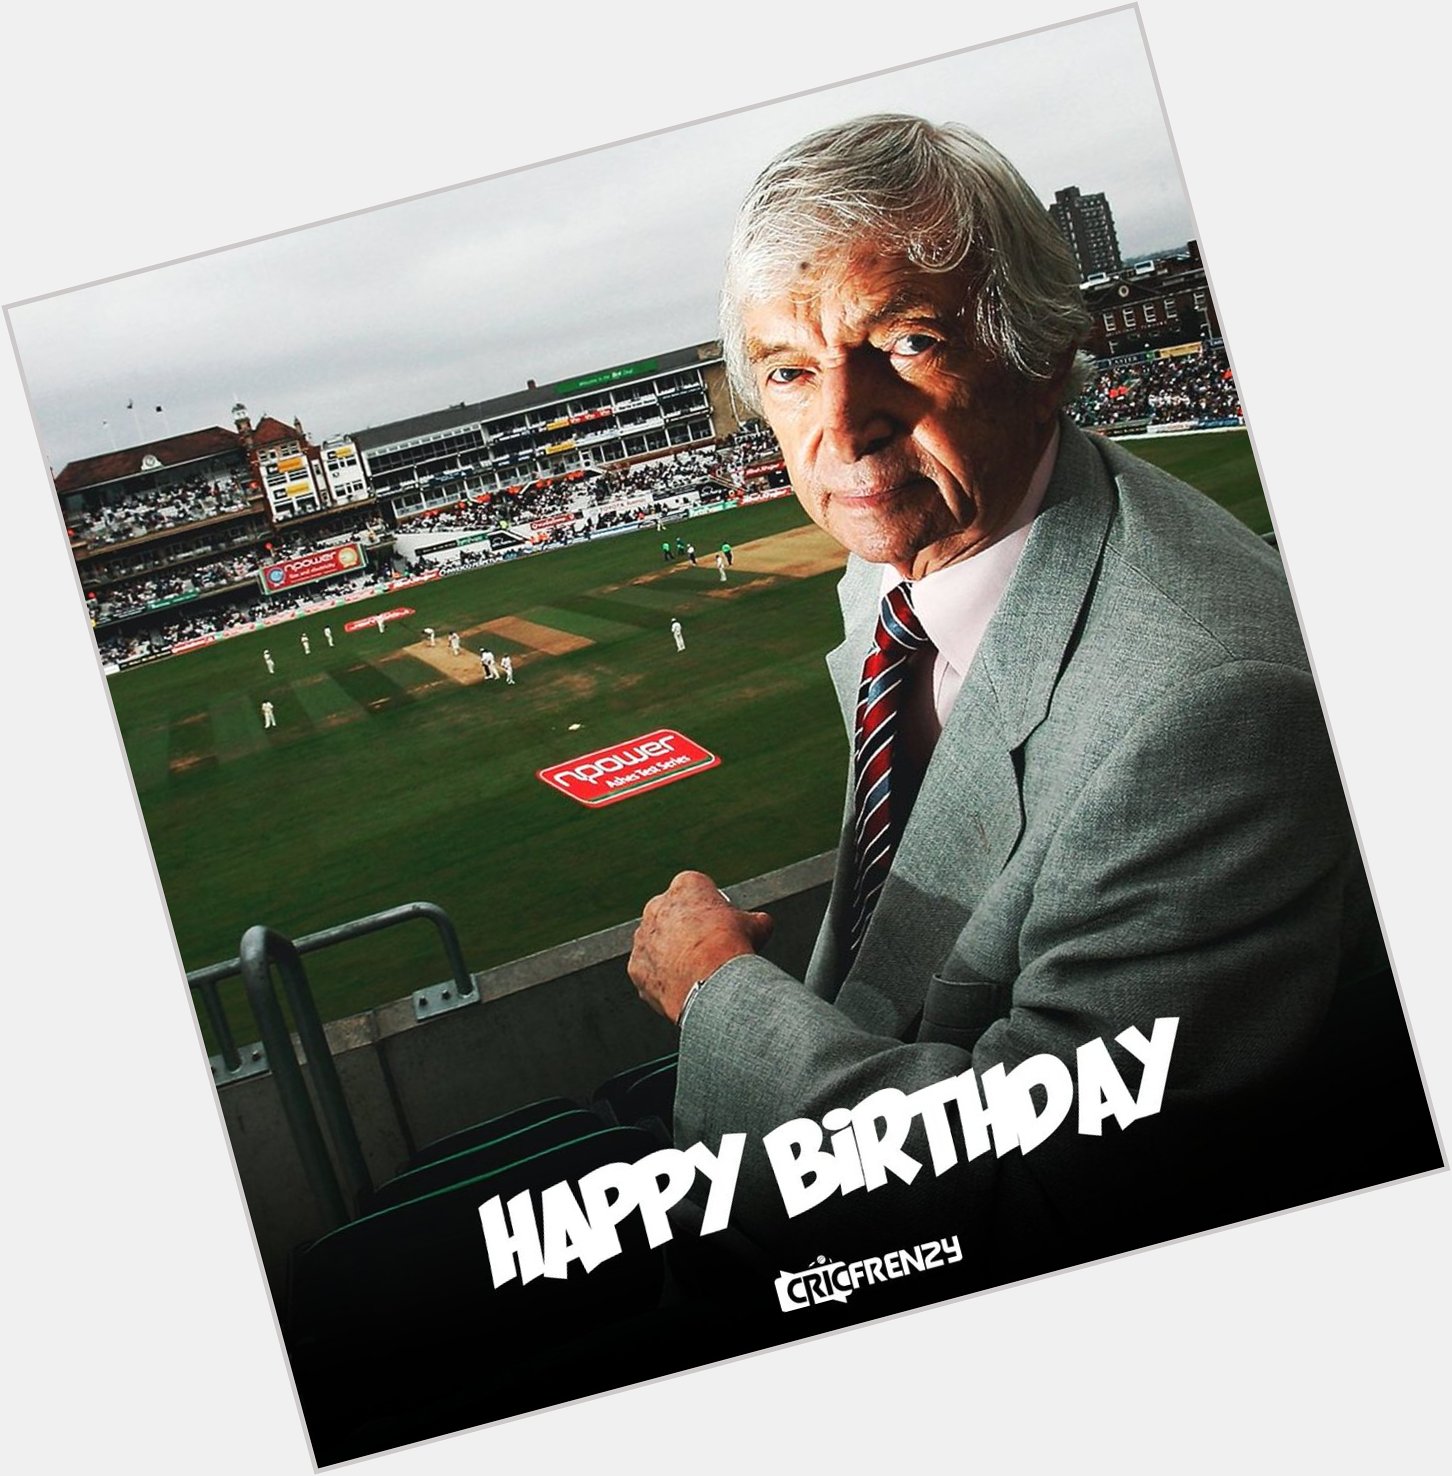 The first player to reach 200 wickets and 2,000 runs in Test cricket
Happy birthday Richie Benaud  